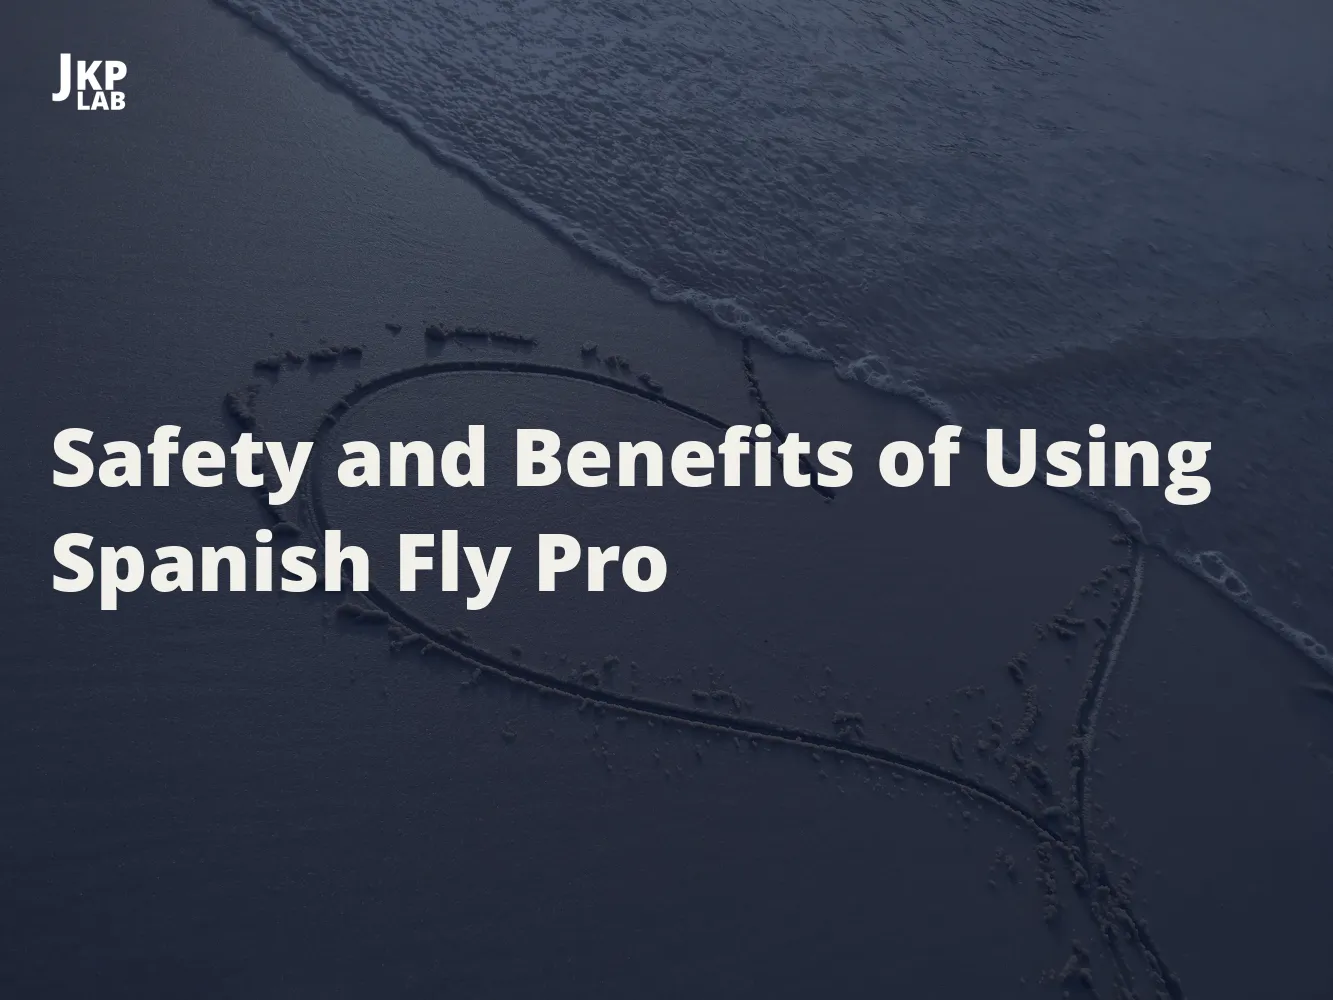 Legality of Spanish Fly Pro